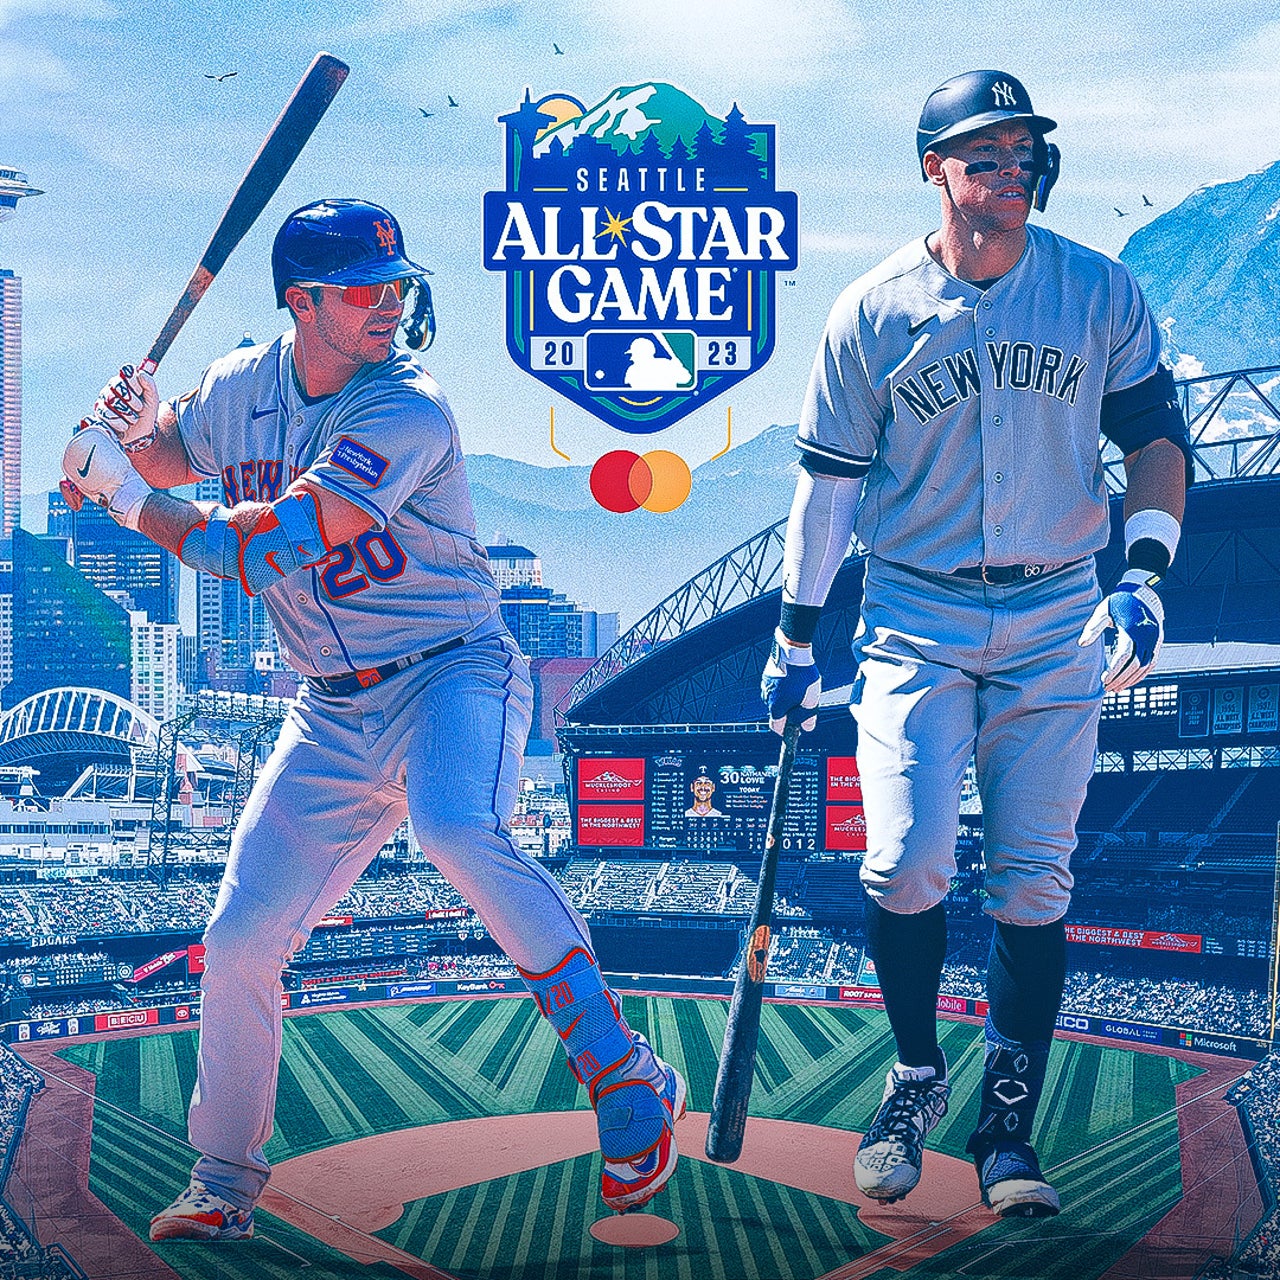 2023 MLB All-Star Game: Rosters, starters, voting results, lineups